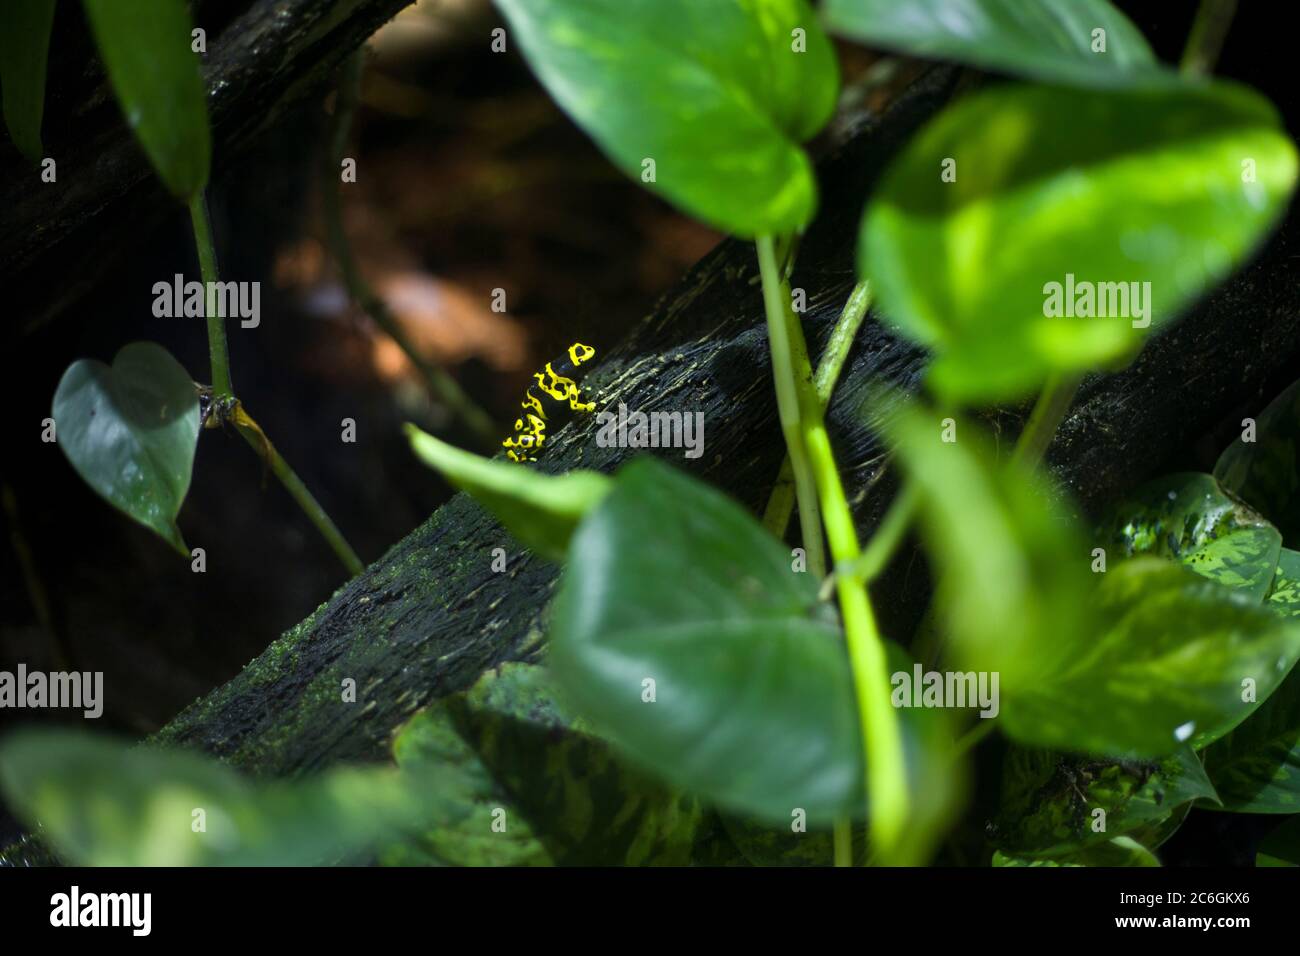 Tiny frog, yellow banded, poison dart frog, colourful frog, tropical frog, mini frog, poisonous, tiny but deadly, small but deadly, frog on plant, Stock Photo